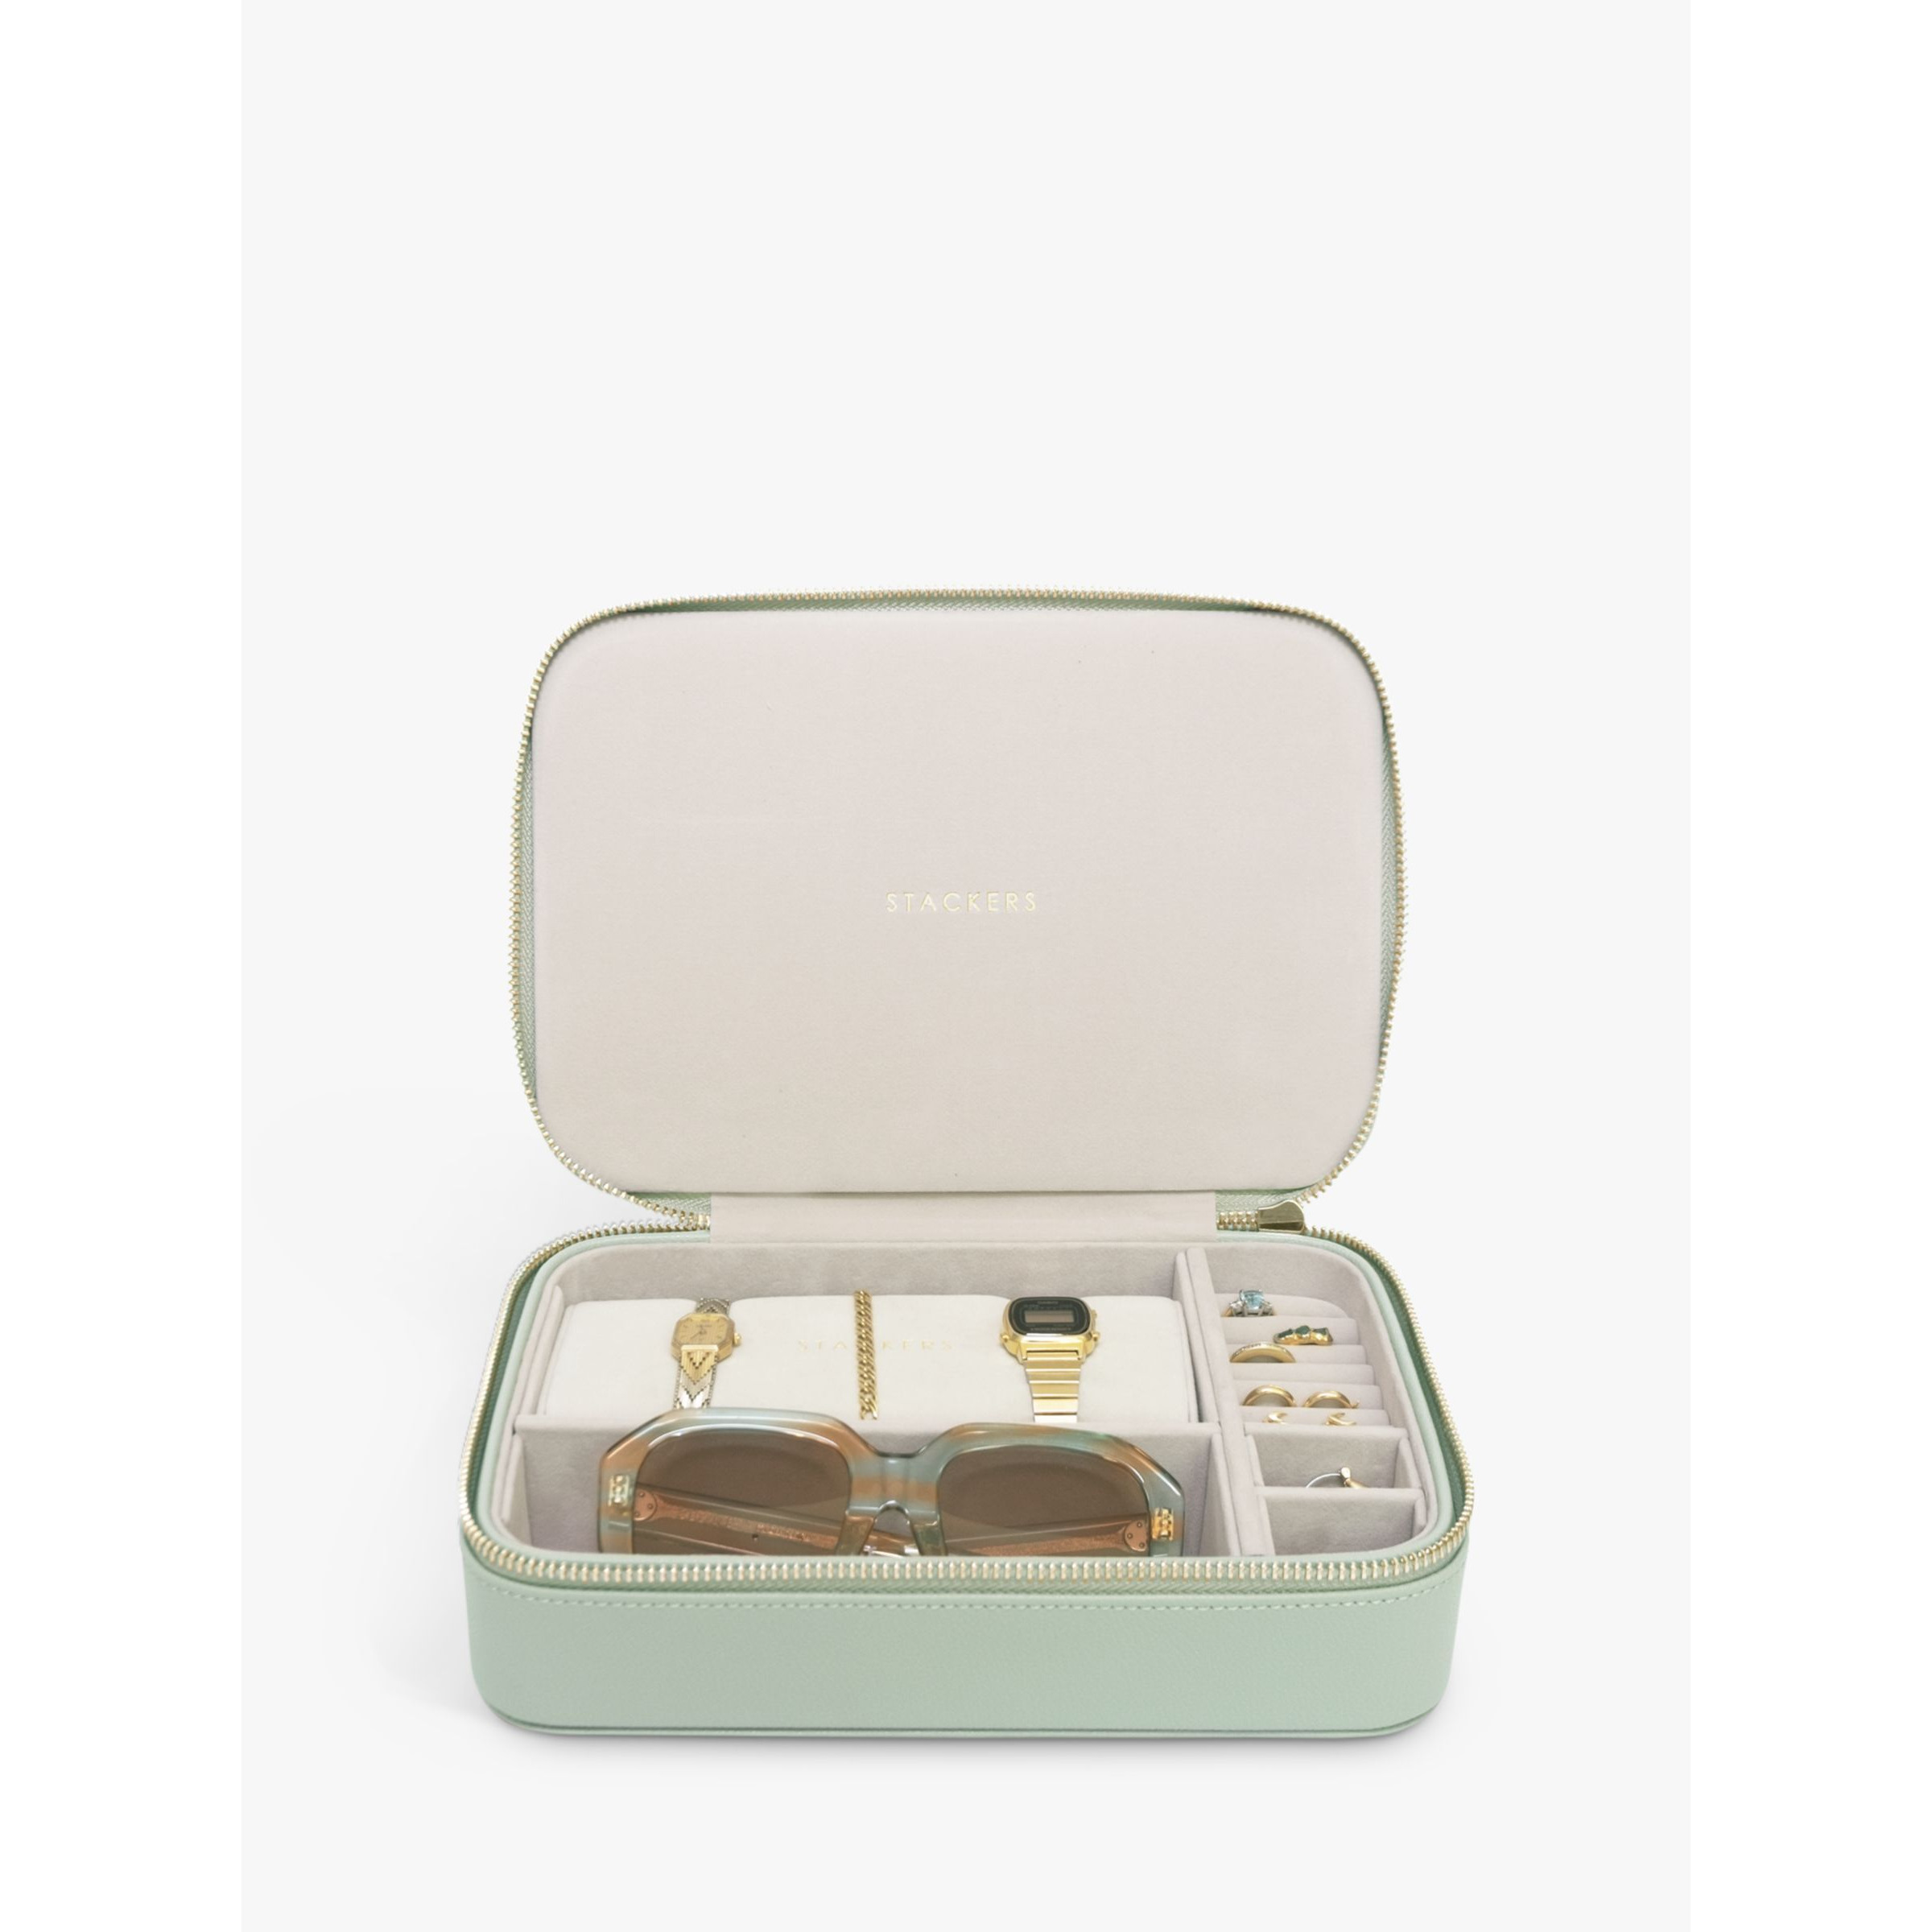 Stackers Jewellery Travel Case - image 1